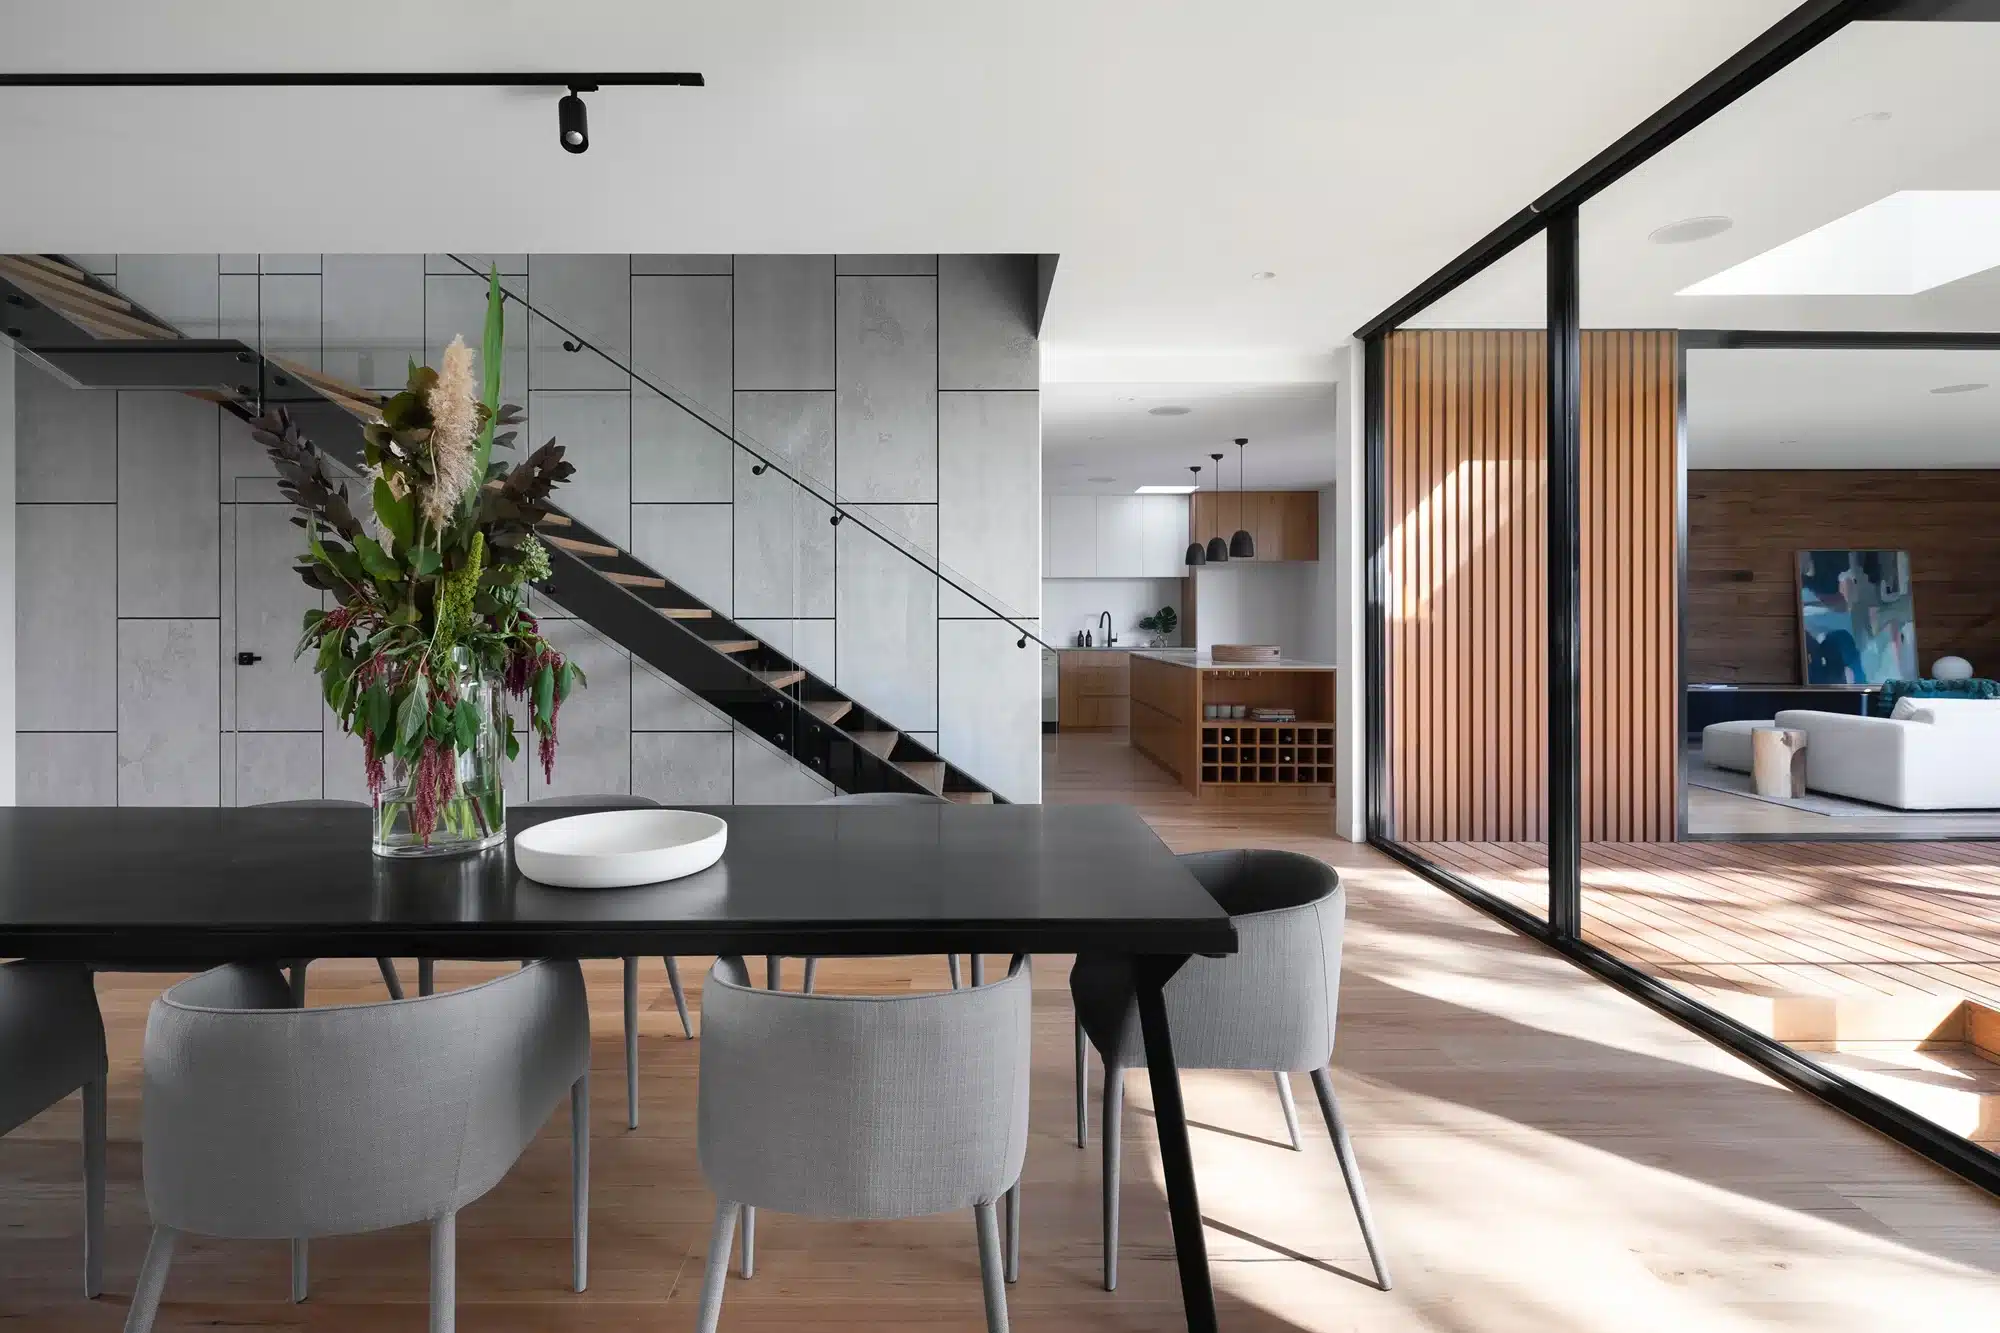 A dining area separated by a glass wall, representing the concept of family trust.